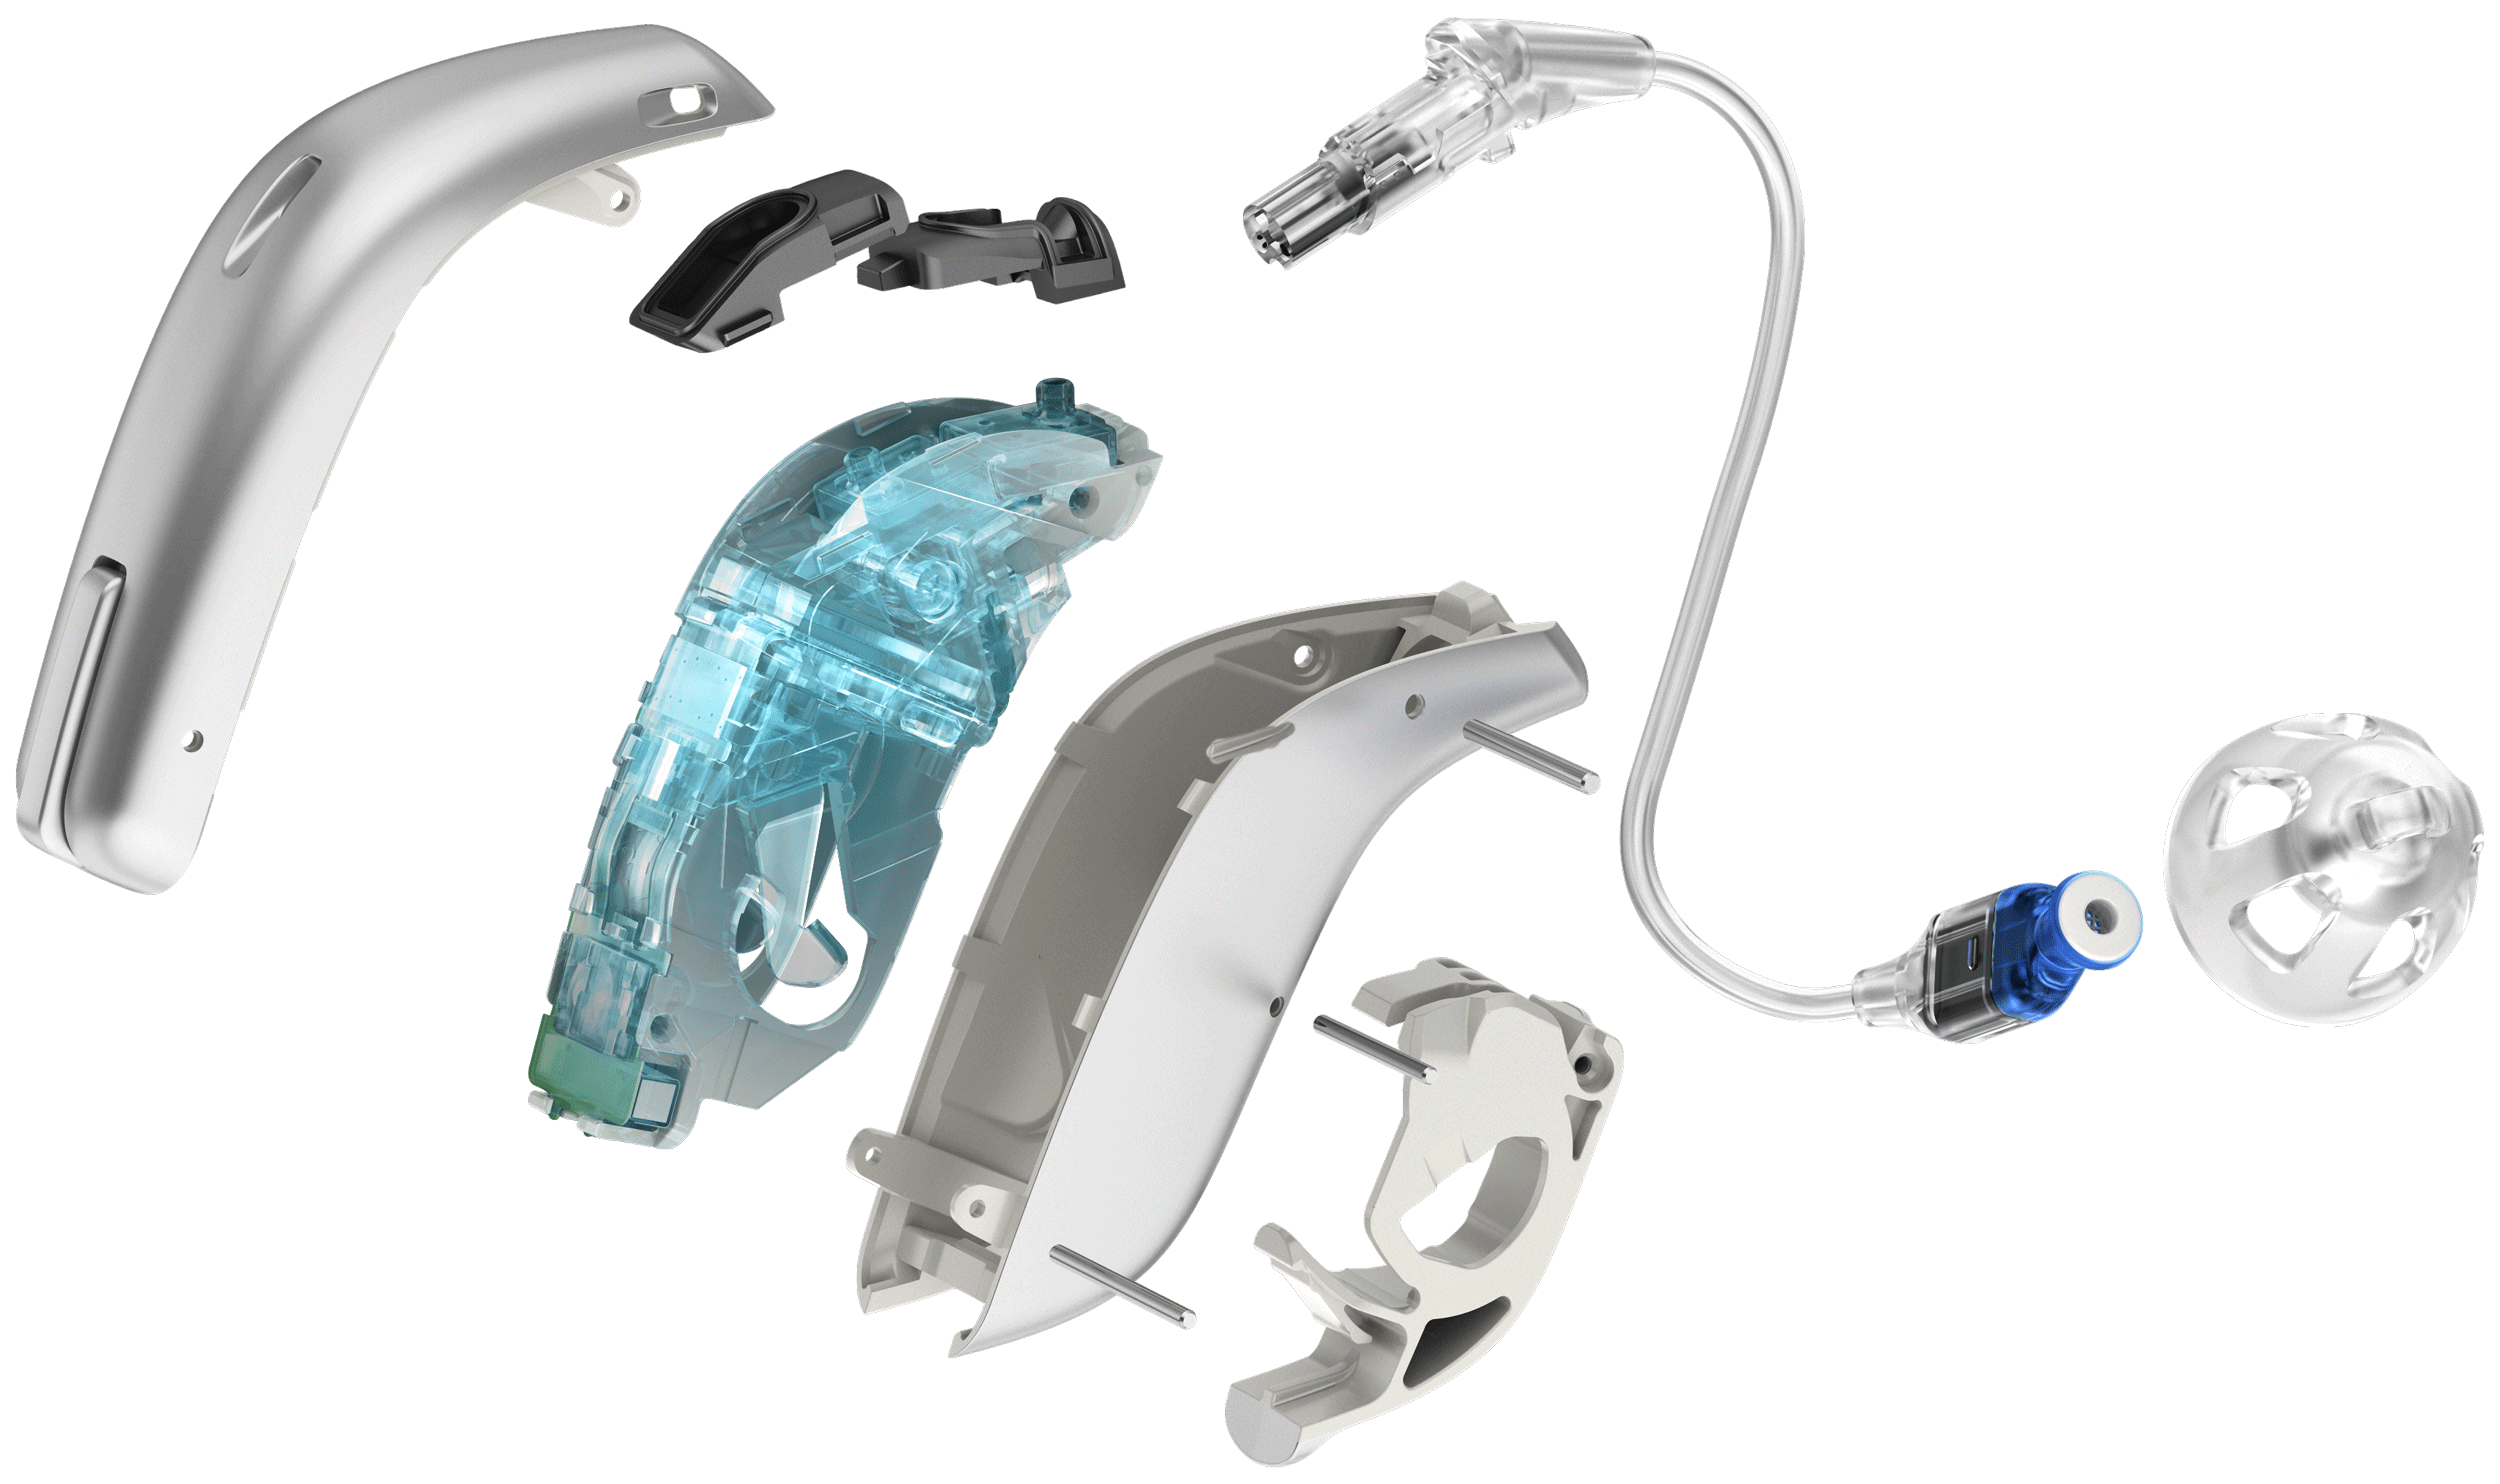 Hearing aid features